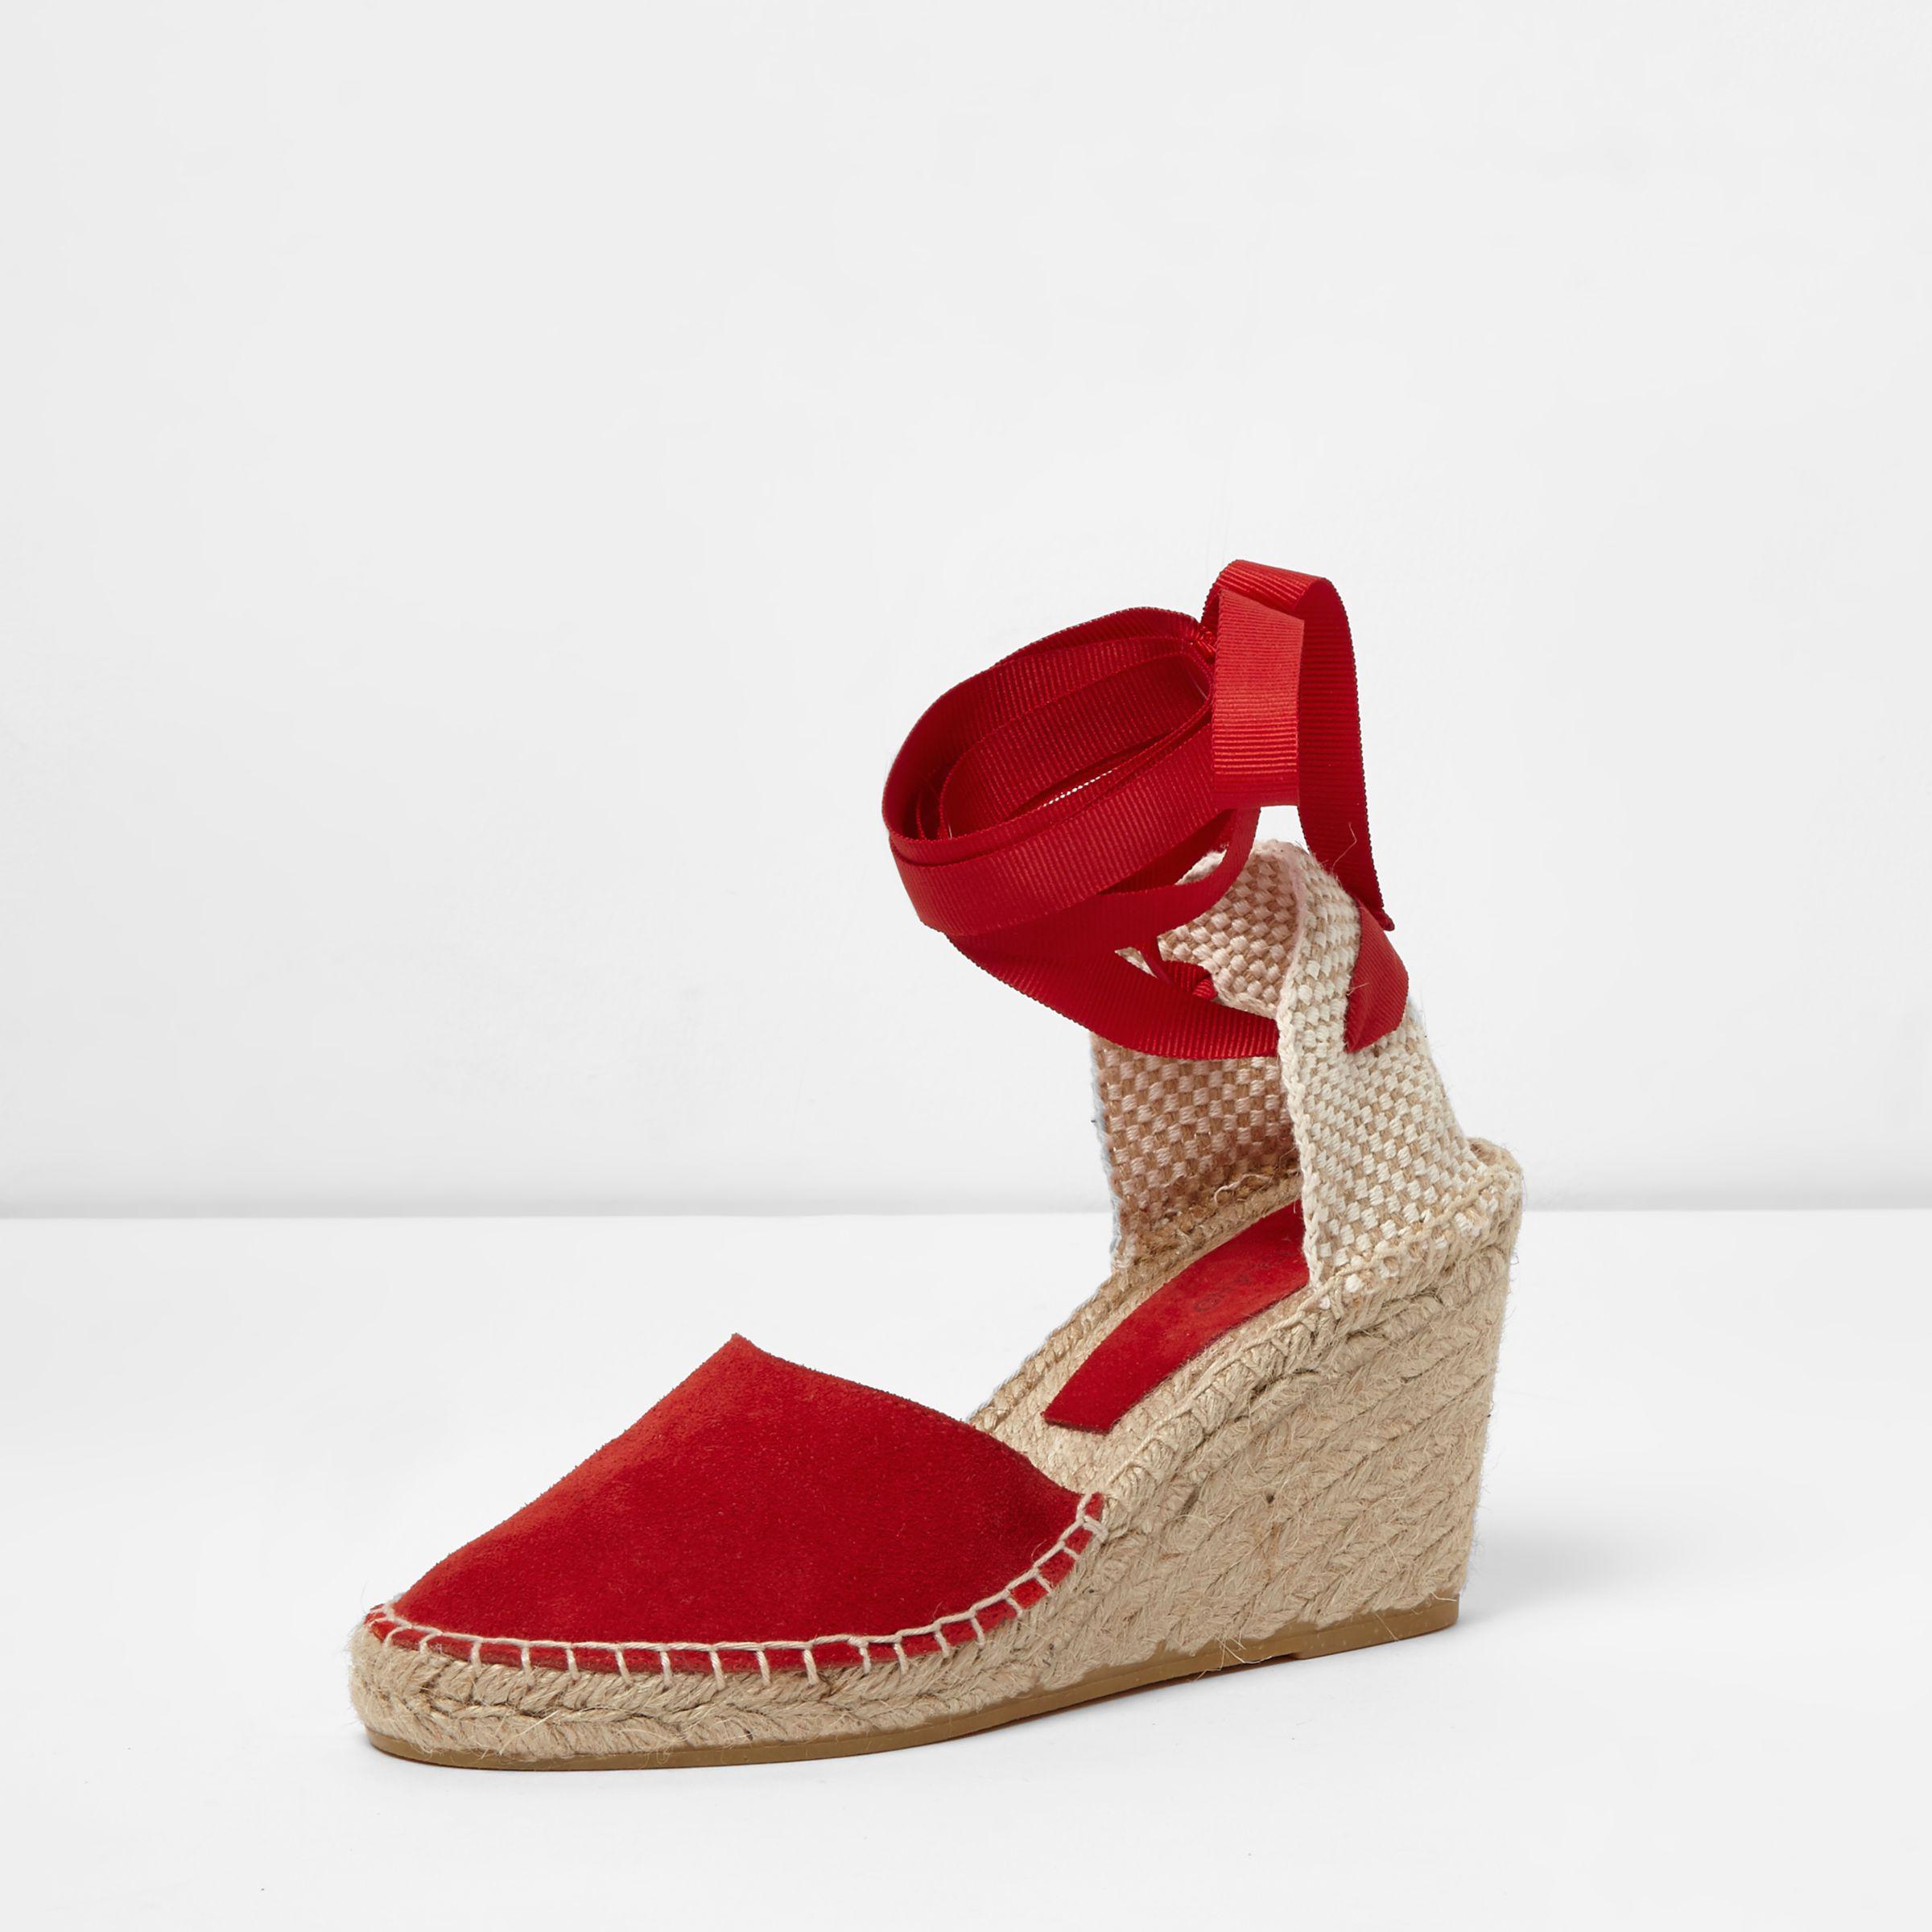 River Island Red Suede Ankle Tie Espadrille Wedges - Lyst